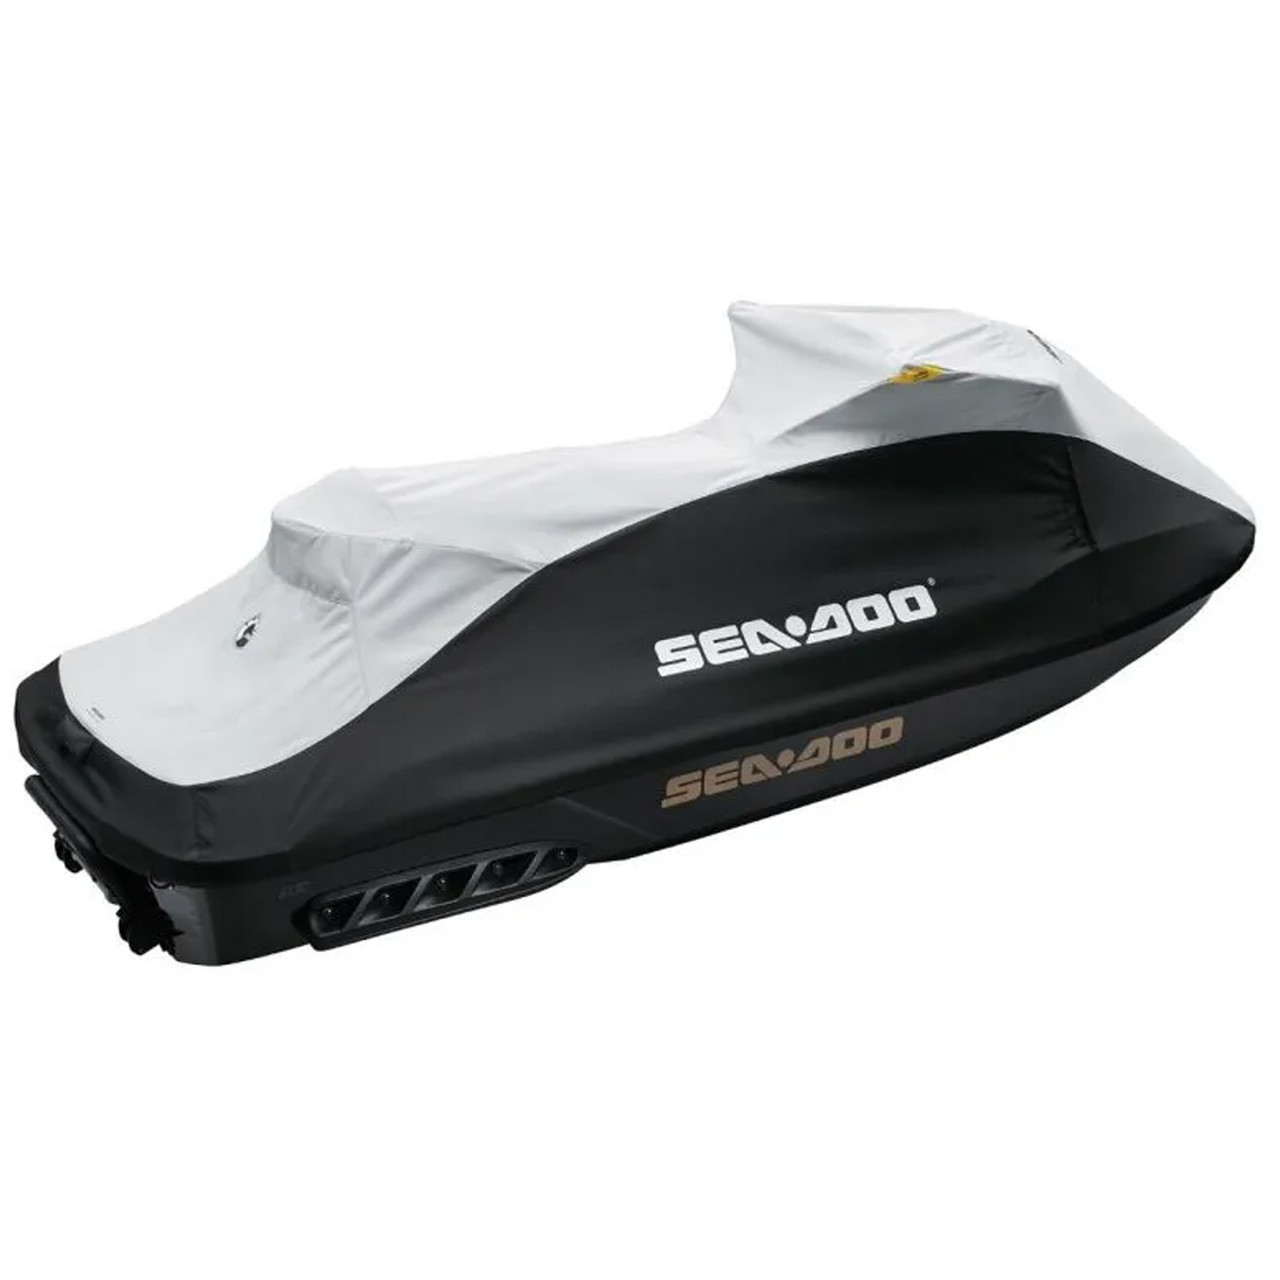 Sea-Doo New OEM, RXP-X Weather Resistant Trailering Cover, 280000543 295100721